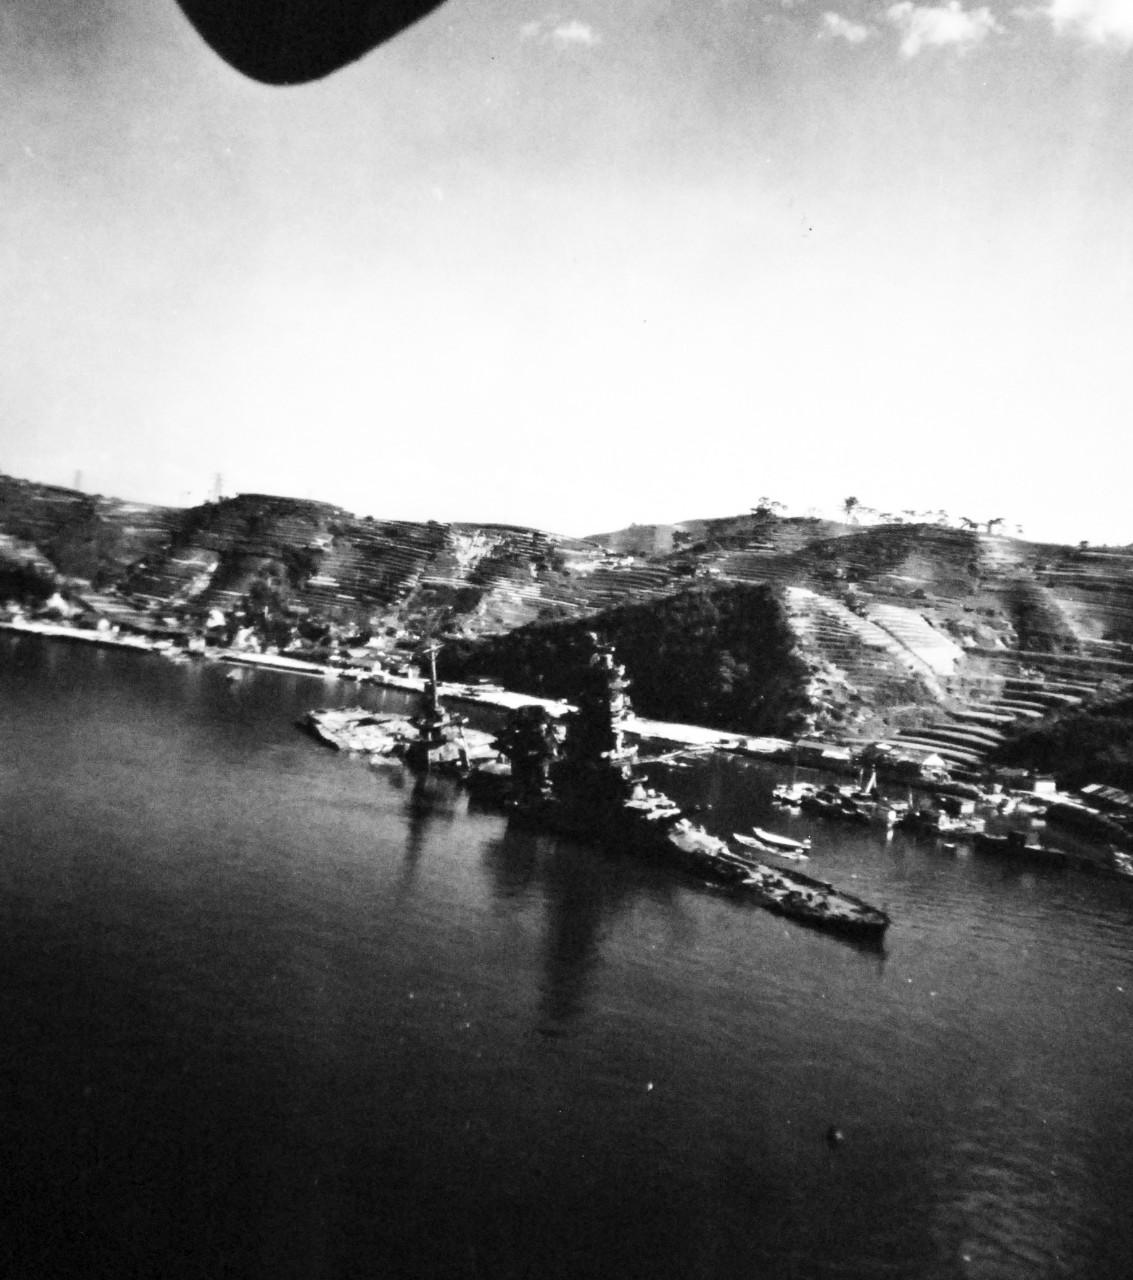 80-G-349909:   Japanese battleship Ise, 1945.     Damaged Japanese ships in Kure Harbor, Japan.  Photographed by aircraft from USS St. George (AV-16),  October 14, 1945.  Official U.S. Navy Photograph, now in the collections of the National Archives (2014/06/19).    